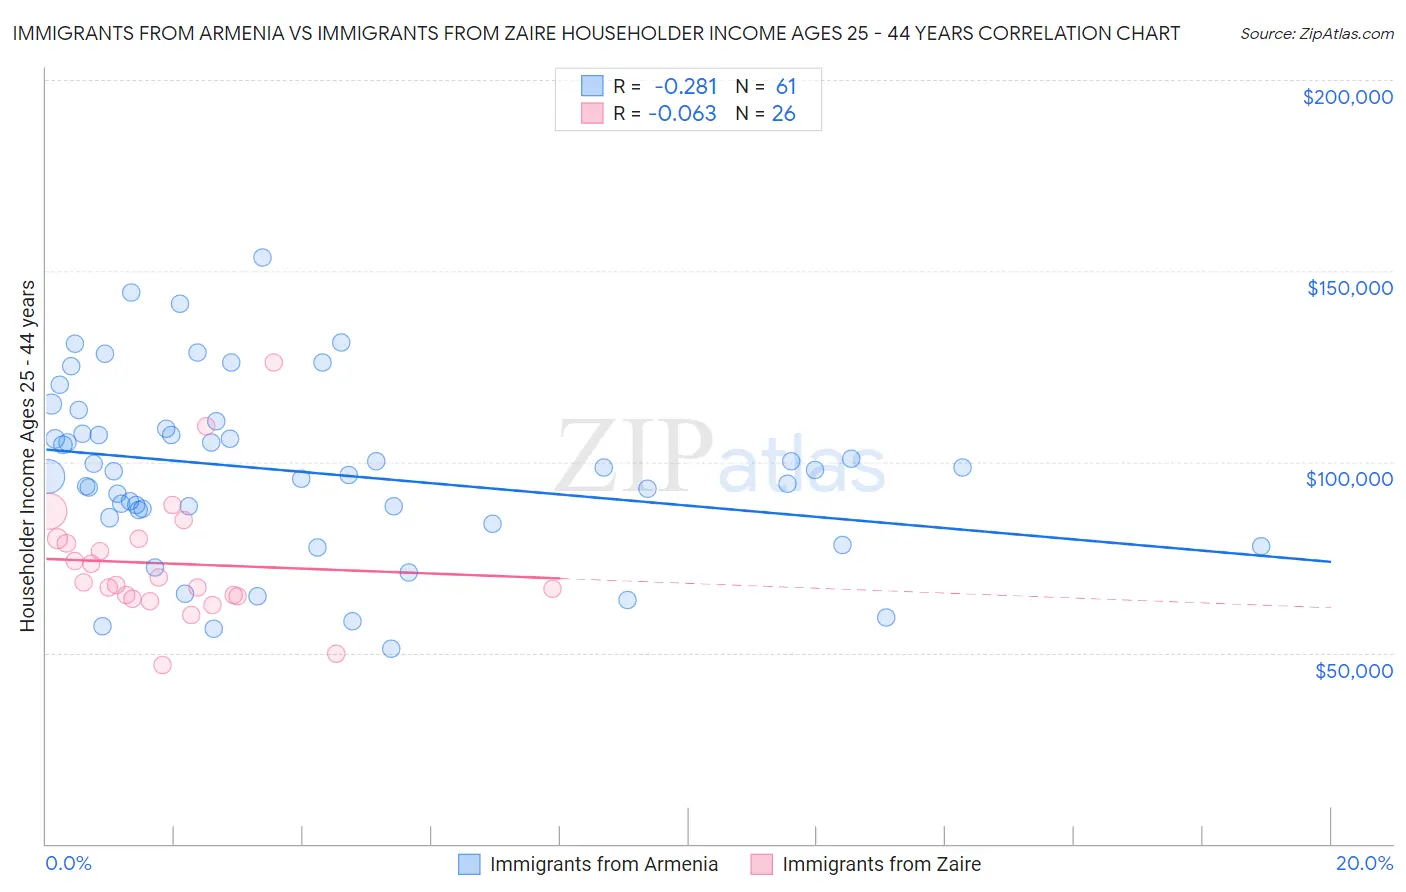 Immigrants from Armenia vs Immigrants from Zaire Householder Income Ages 25 - 44 years